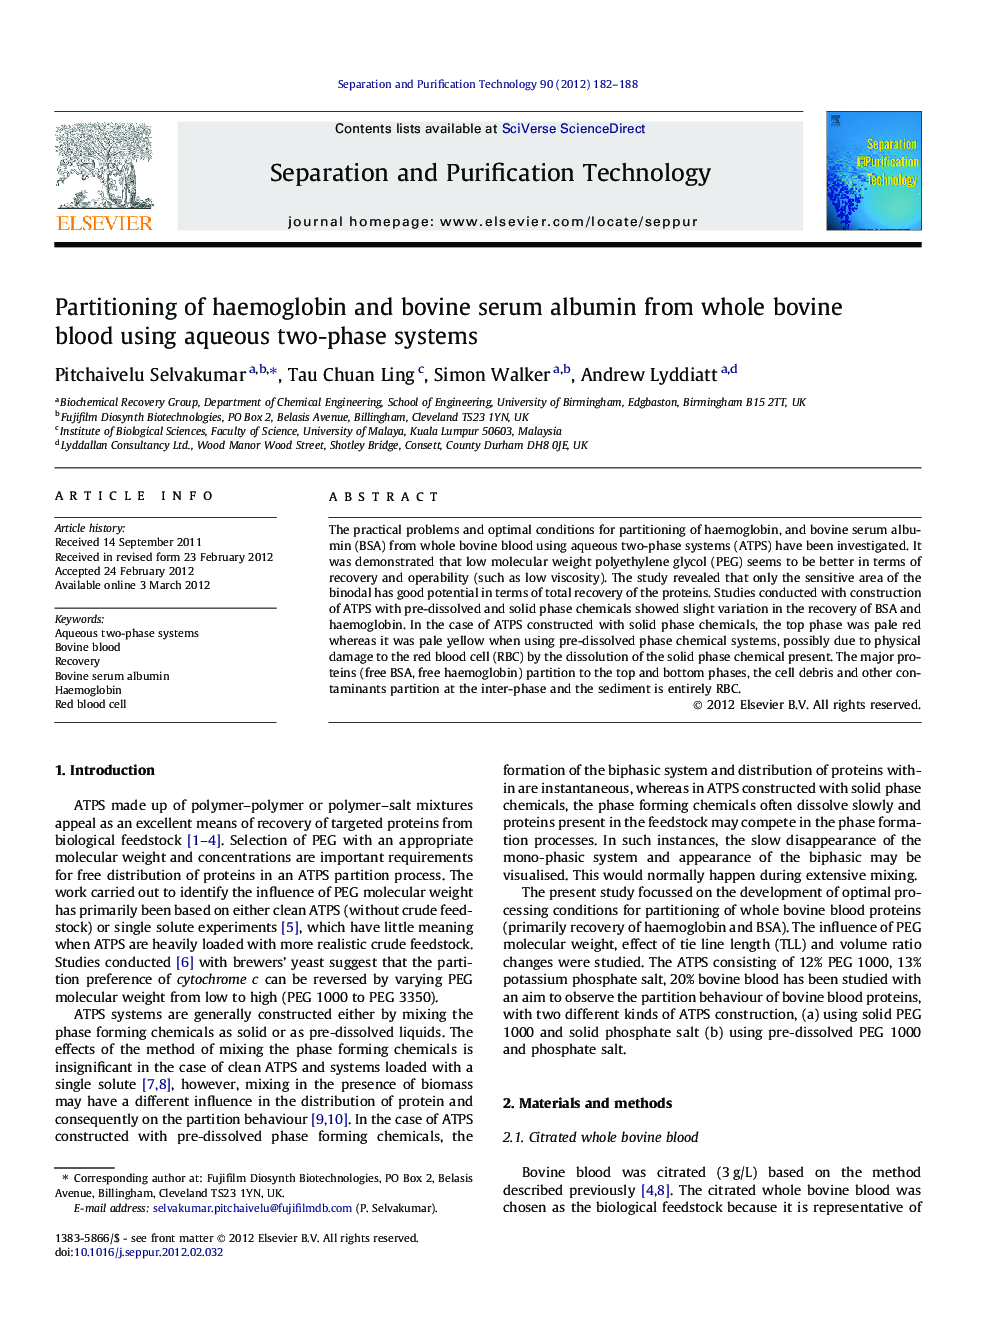 Partitioning of haemoglobin and bovine serum albumin from whole bovine blood using aqueous two-phase systems